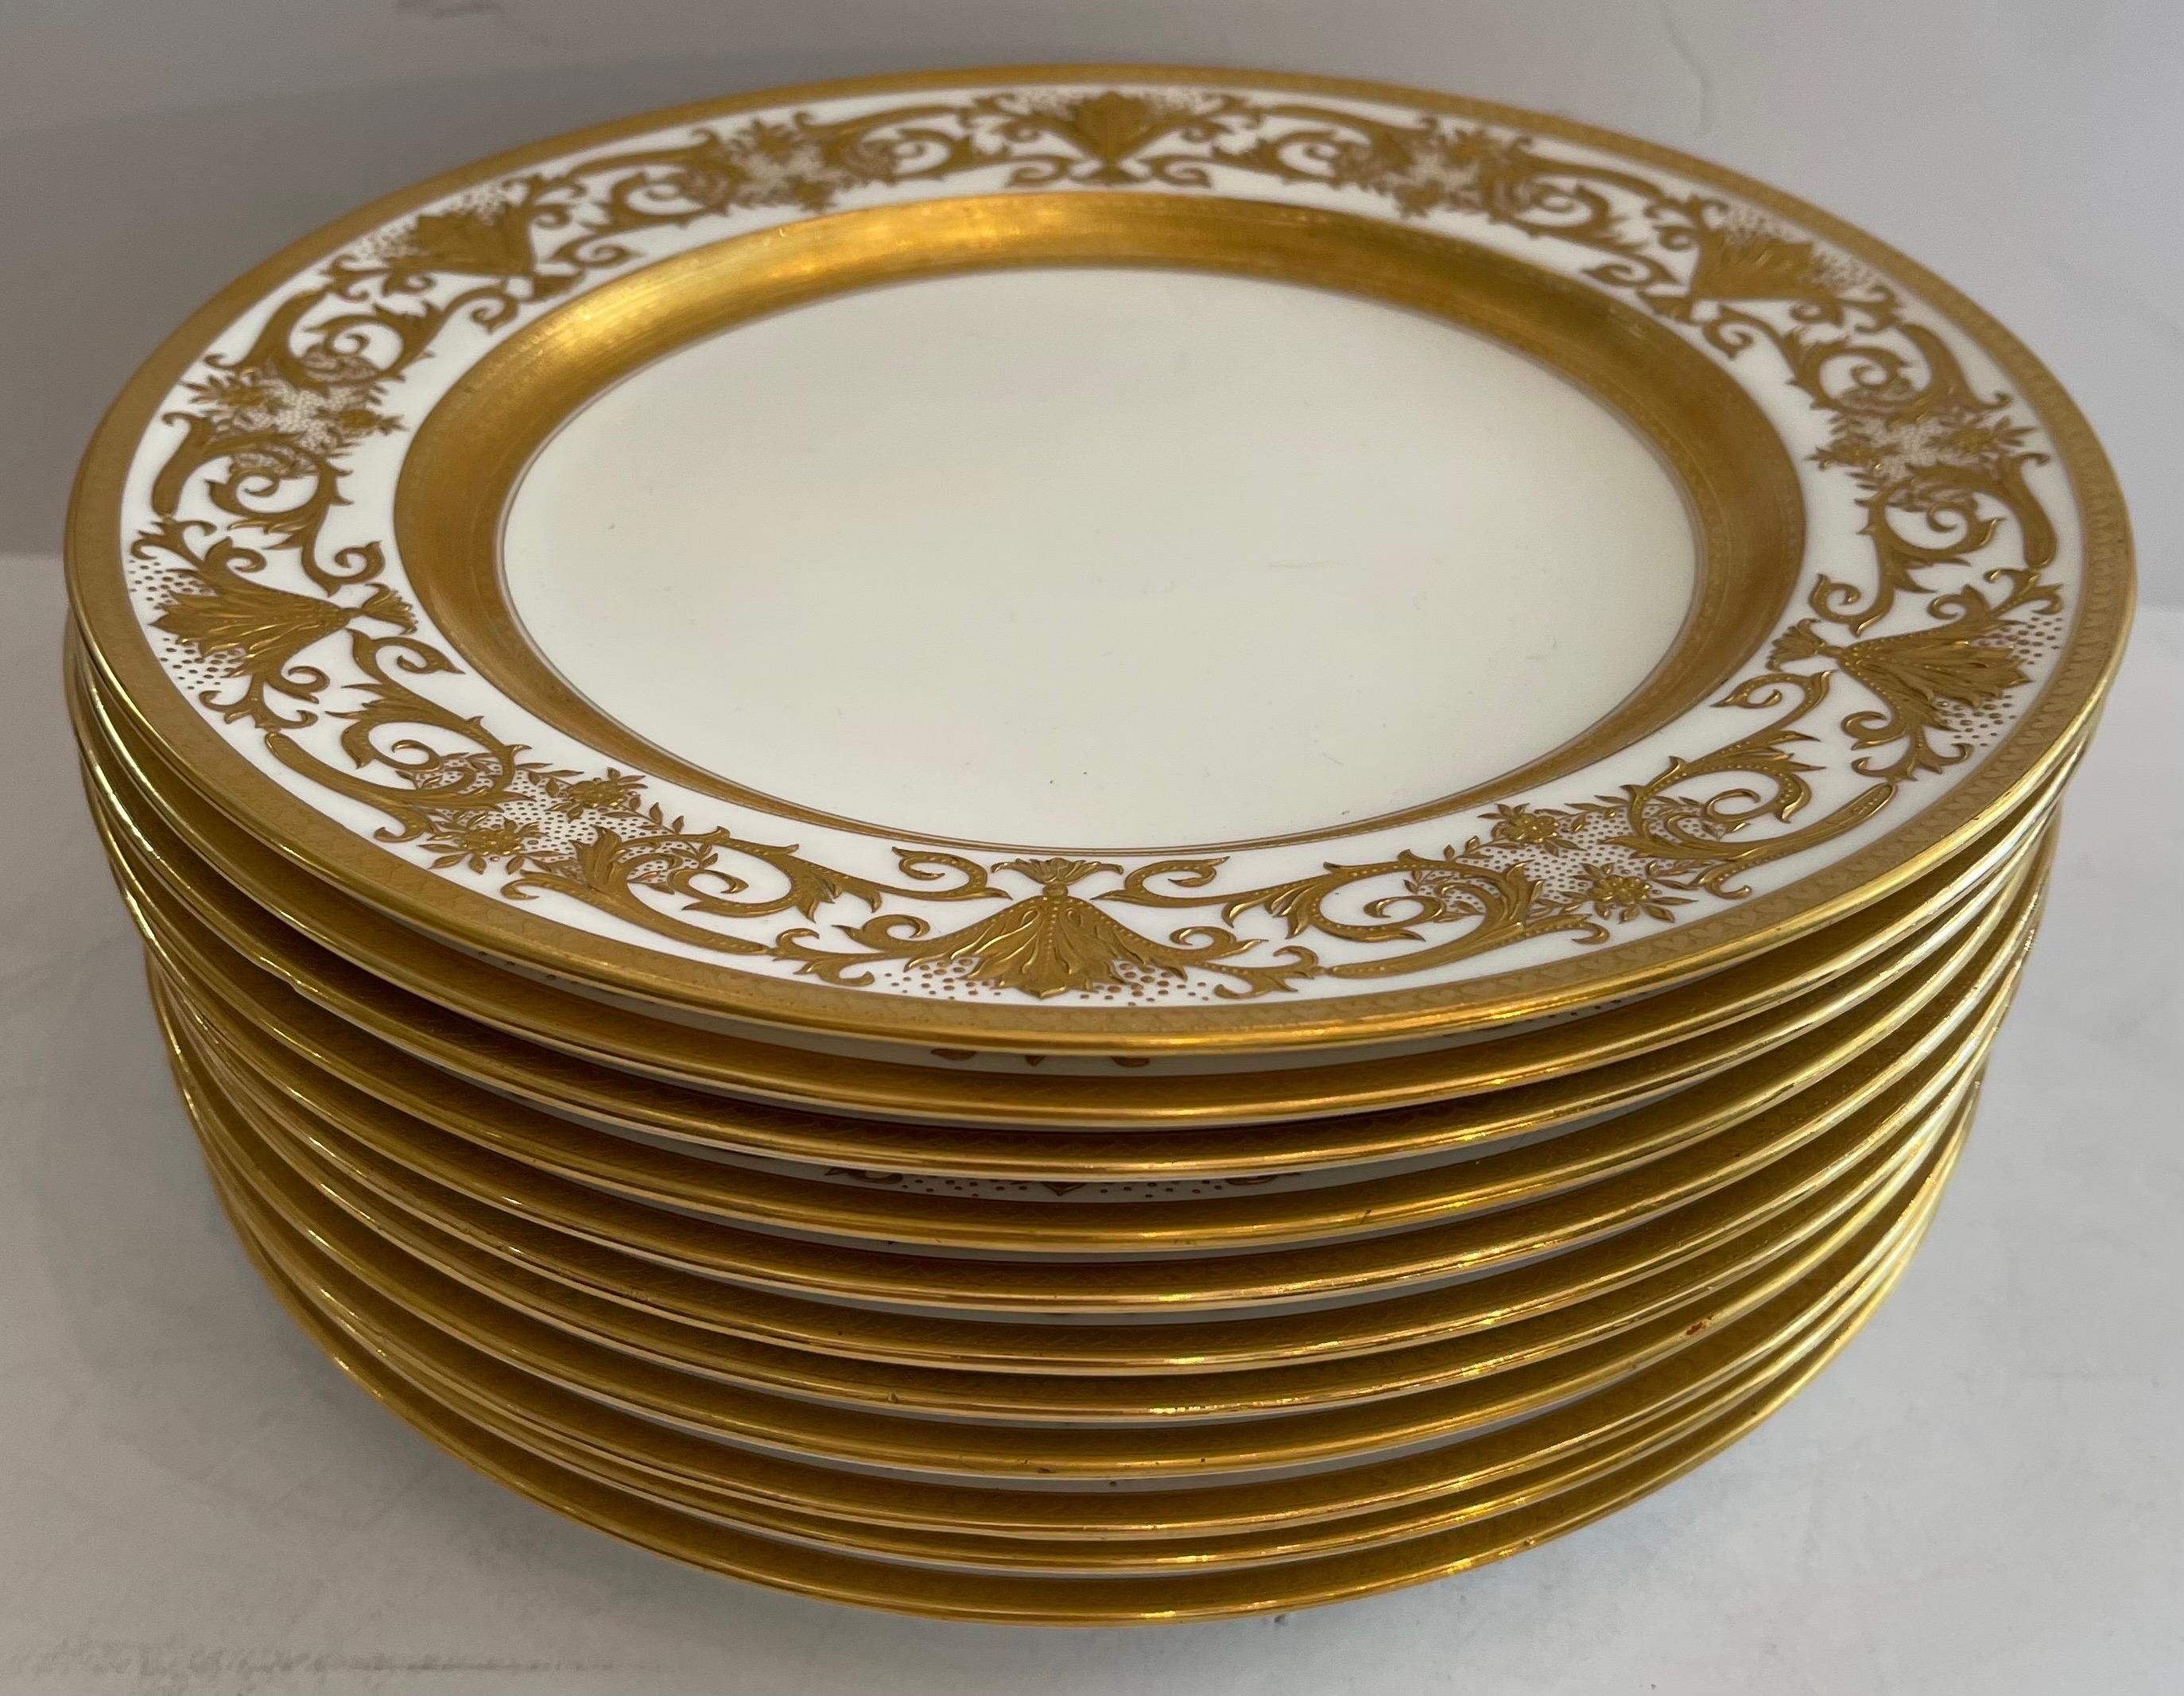 A Wonderful service set of 12 Minton dinner plates having raised gold gilded over a white plate with regency urns and filigree pattern.
In excellent display Collectors condition
Measures: Diameter 10 1/2 inches.